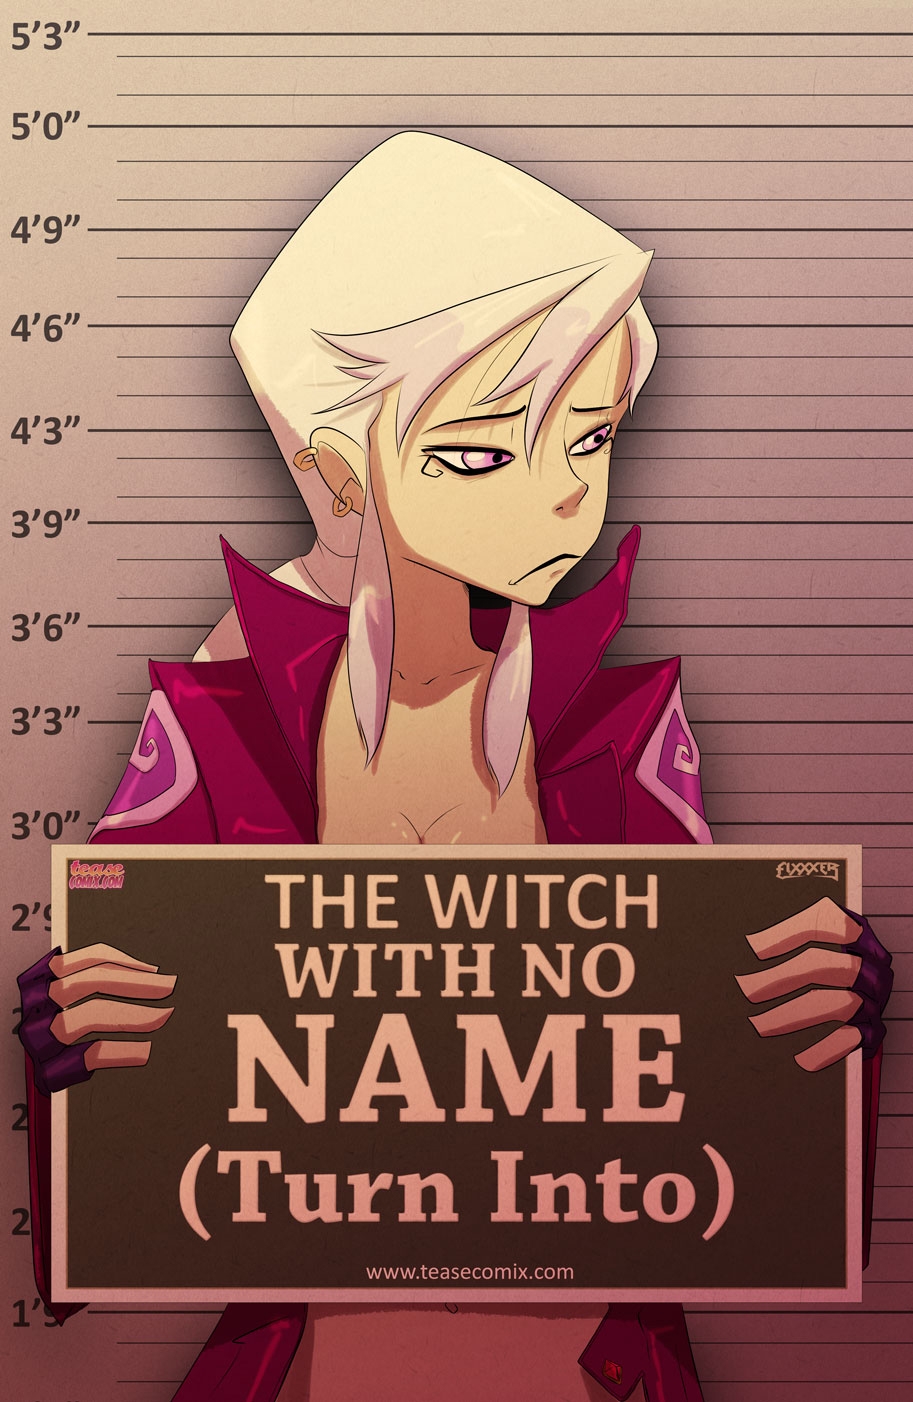 [Fixxxer] The Witch With No Name